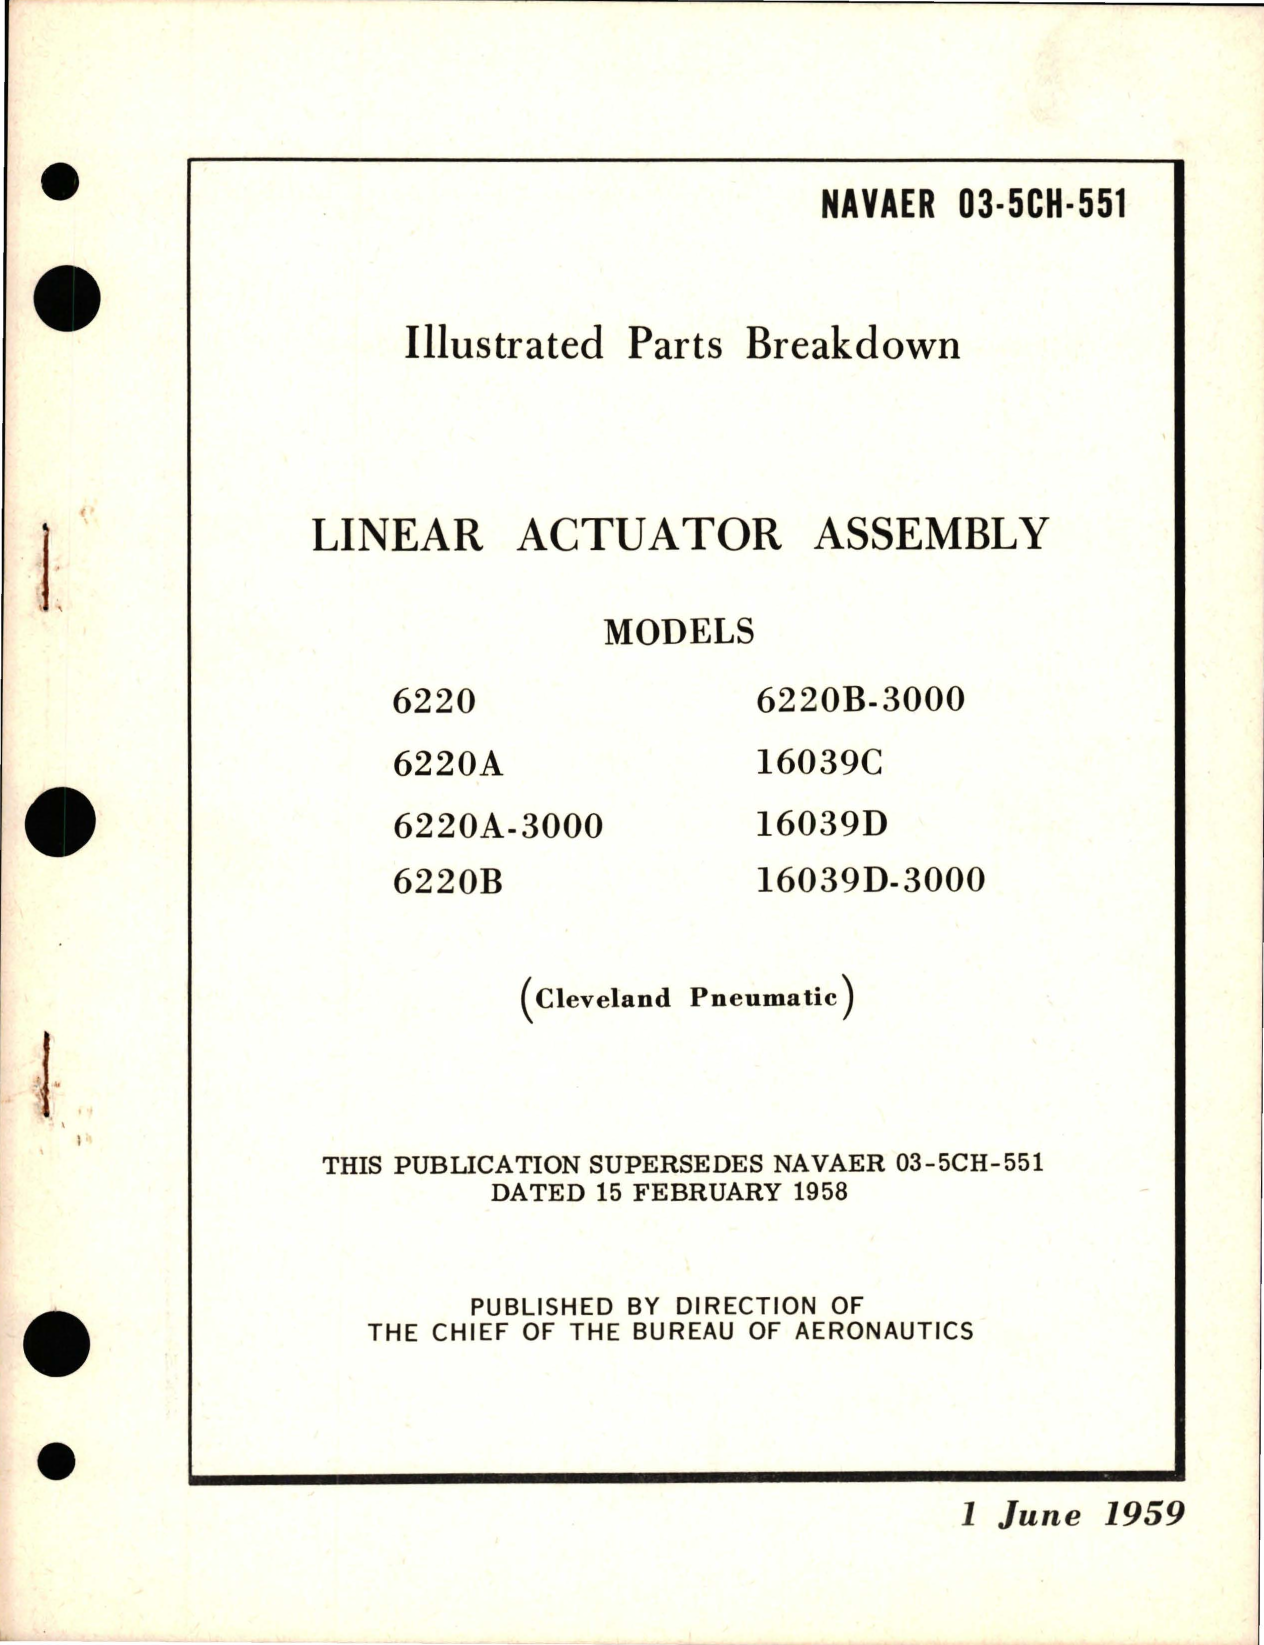 Sample page 1 from AirCorps Library document: Illustrated Parts Breakdown for Linear Actuator Assembly 